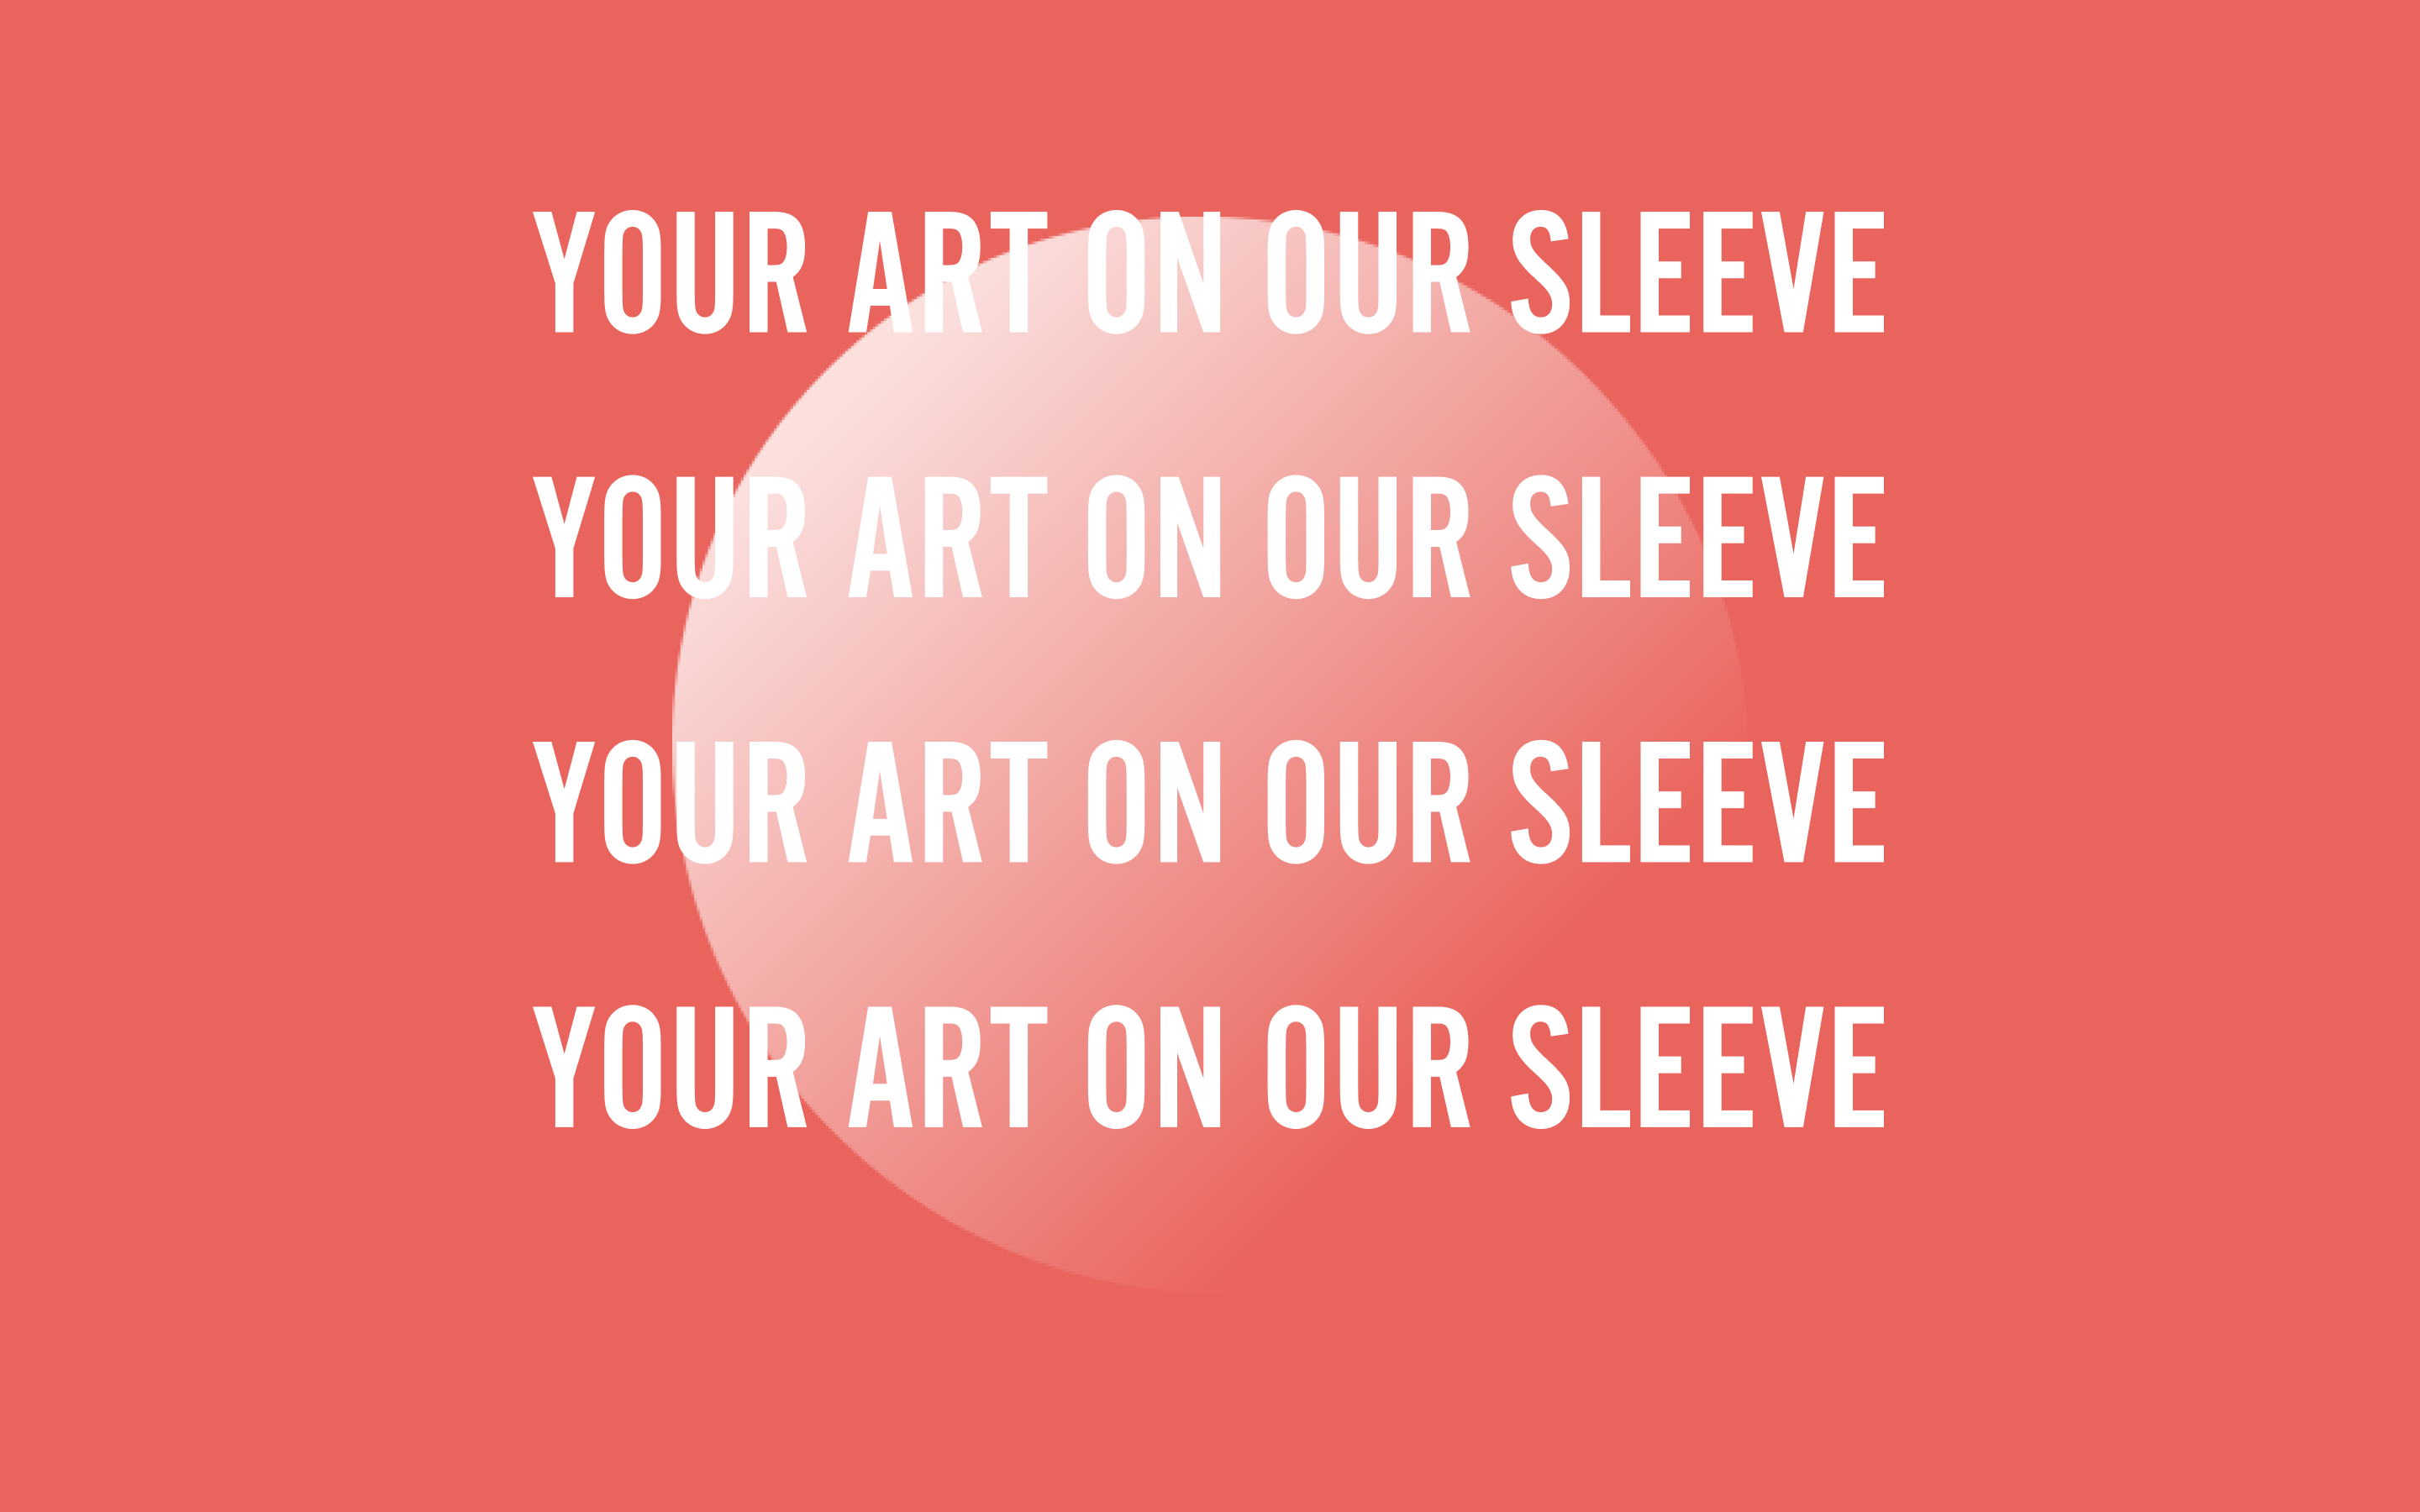 An art piece reading 'your art on our sleeve' repeated 4 times